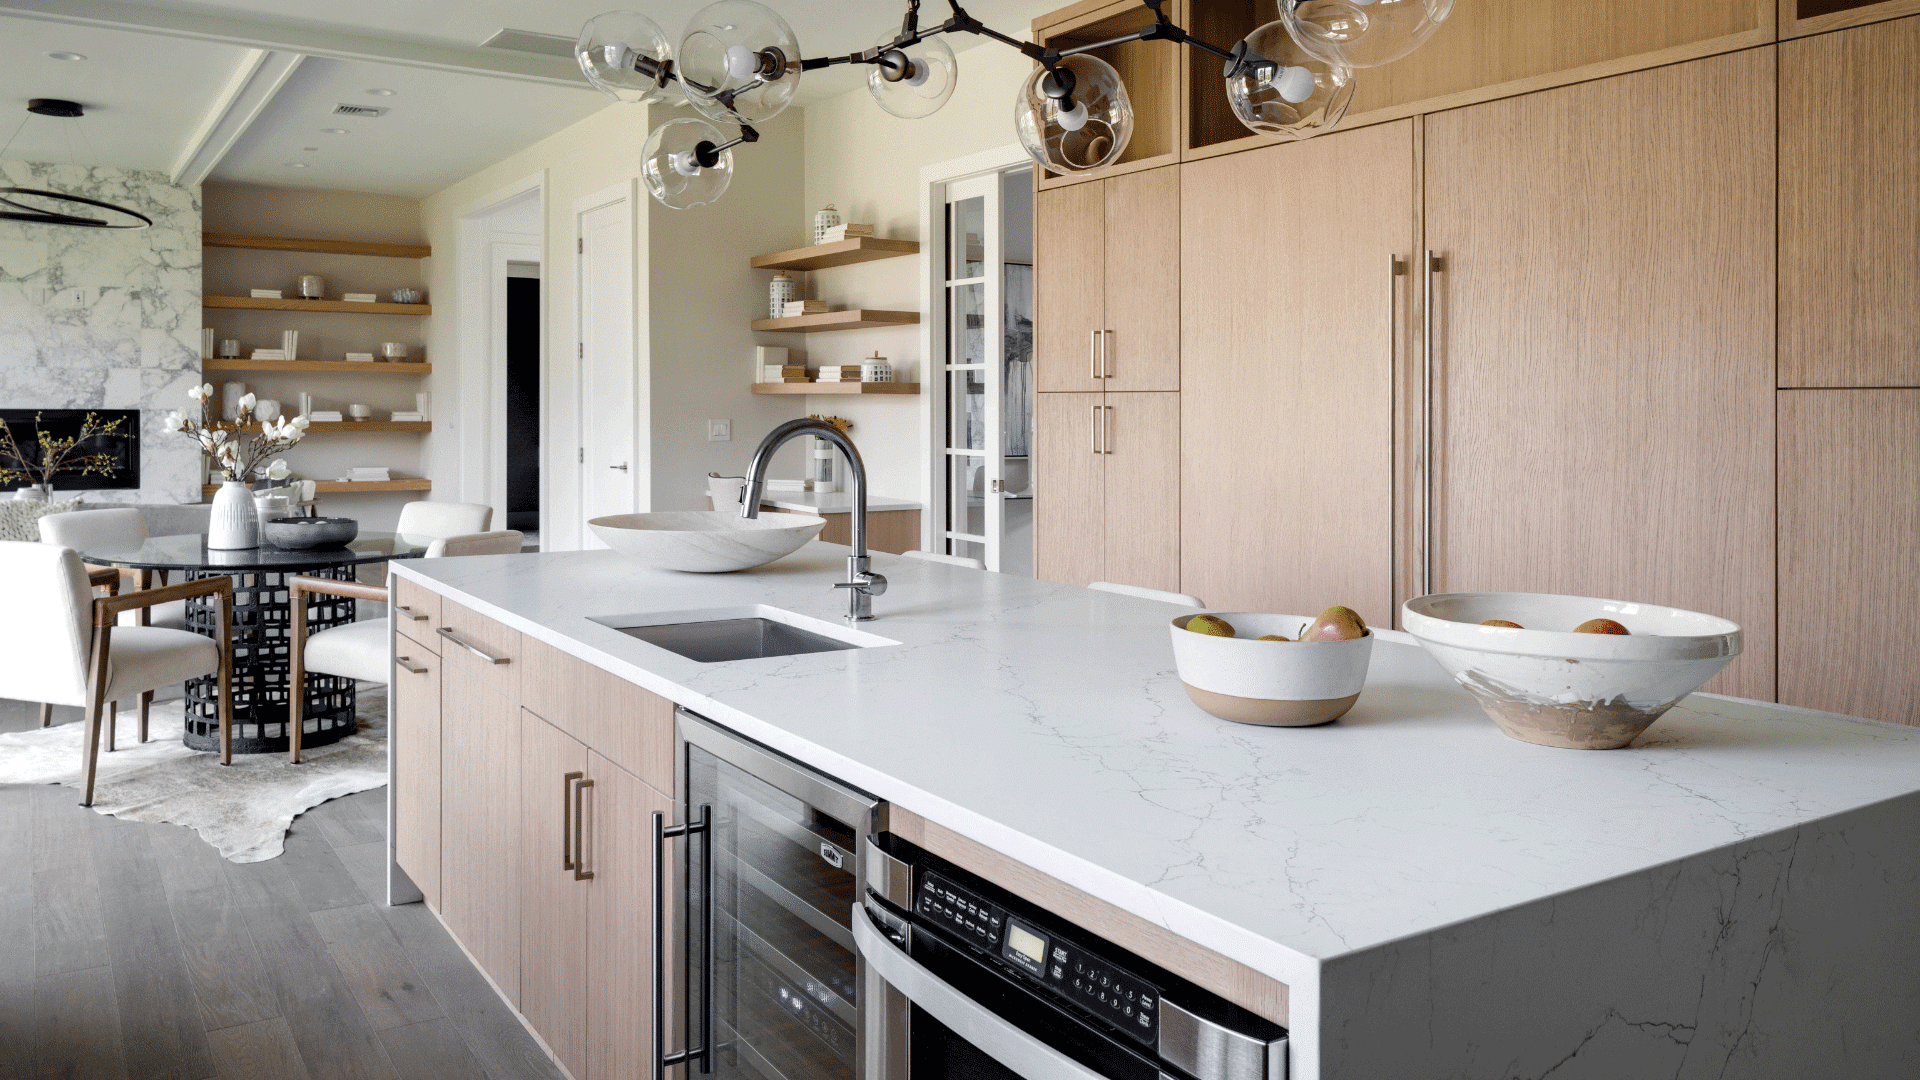 St. Martin brown kitchen cabinets with white countertop